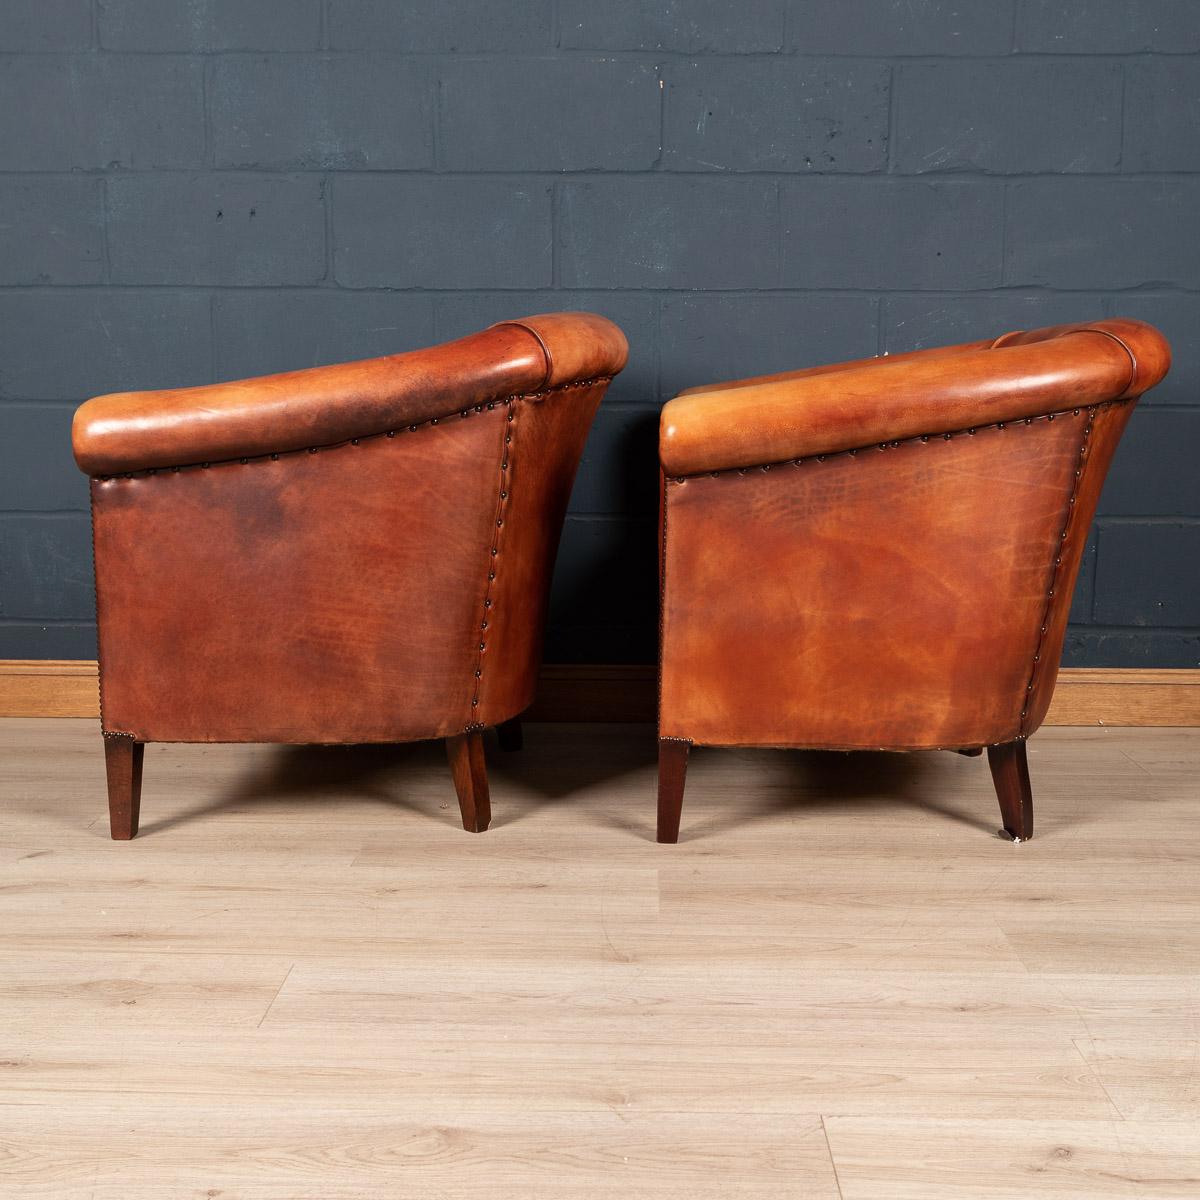 Showing superb patina and colour, this wonderful pair of tub chairs were hand upholstered sheepskin leather in Holland by the finest craftsmen. Fantastic look for any interior, both modern and traditional.

Condition

In good condition - wear